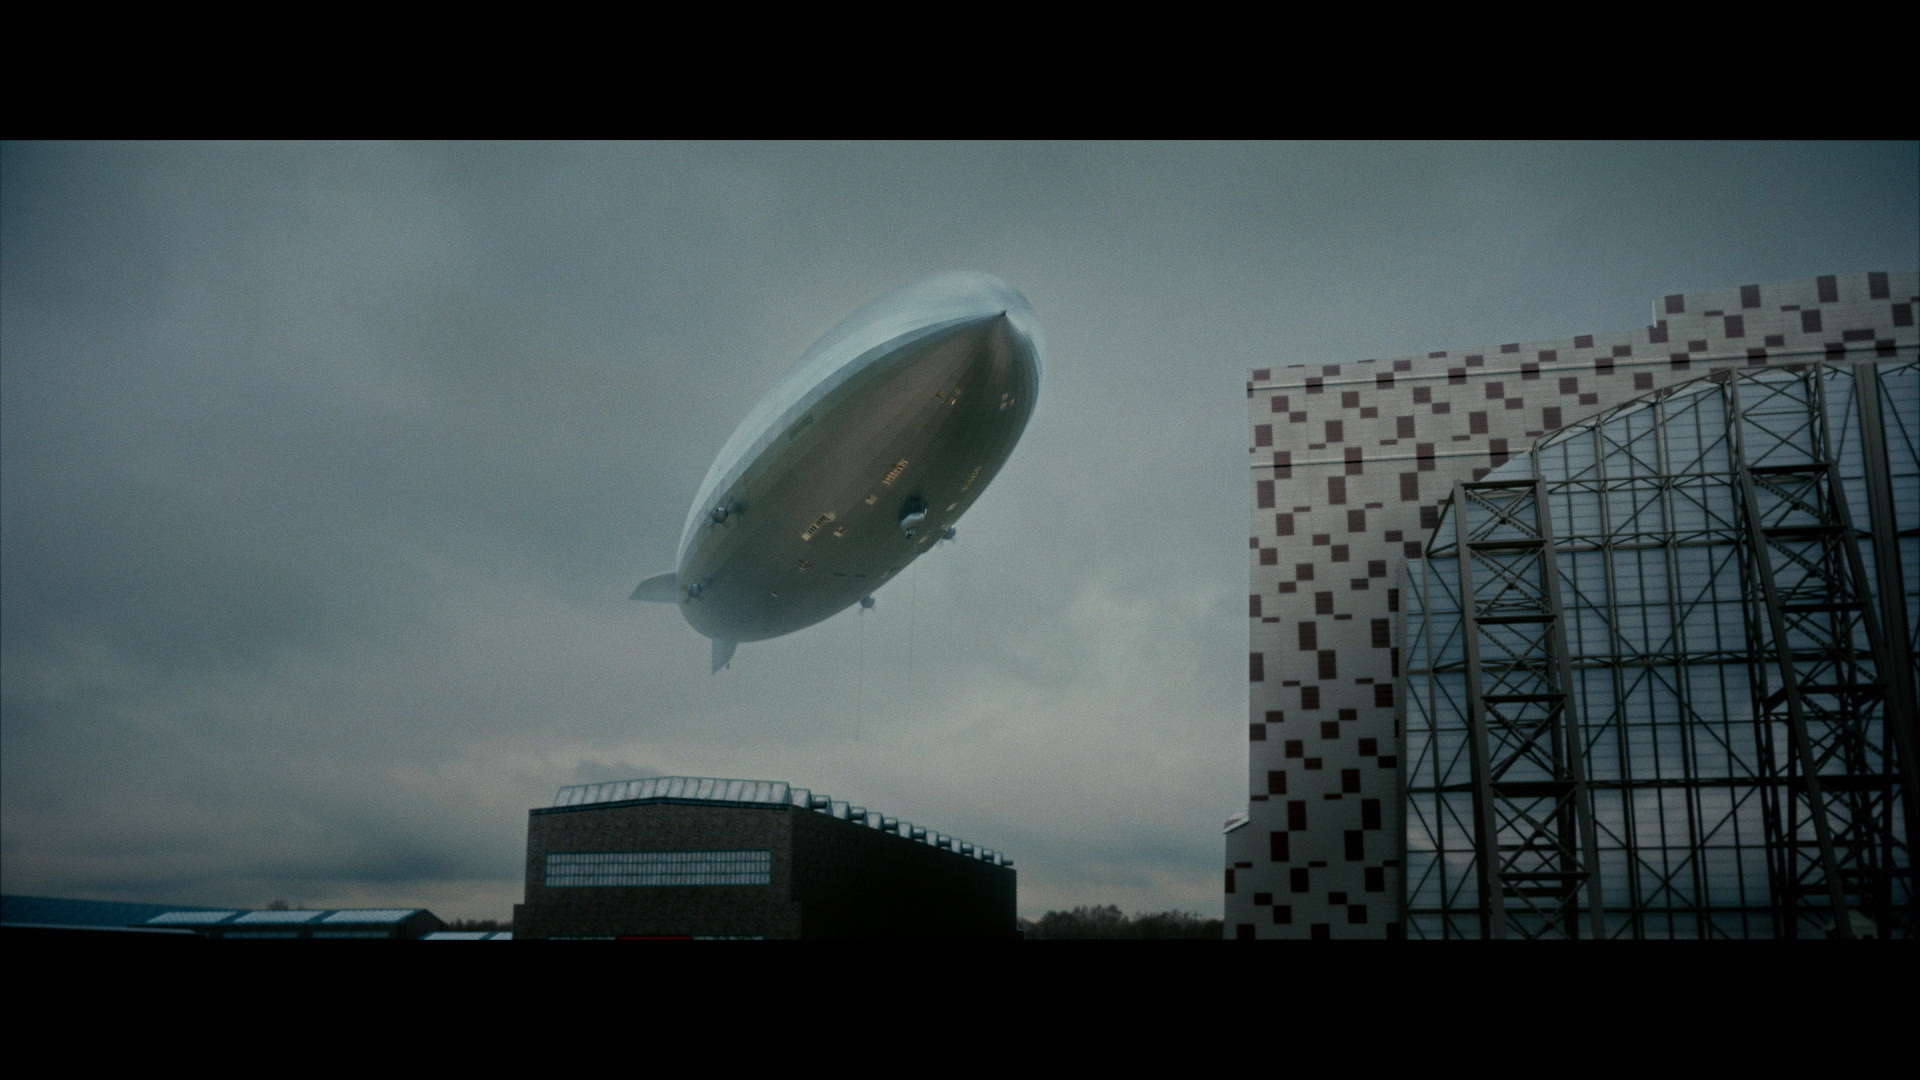 A CGI rendering of the Hindenburg, from I Was There scene